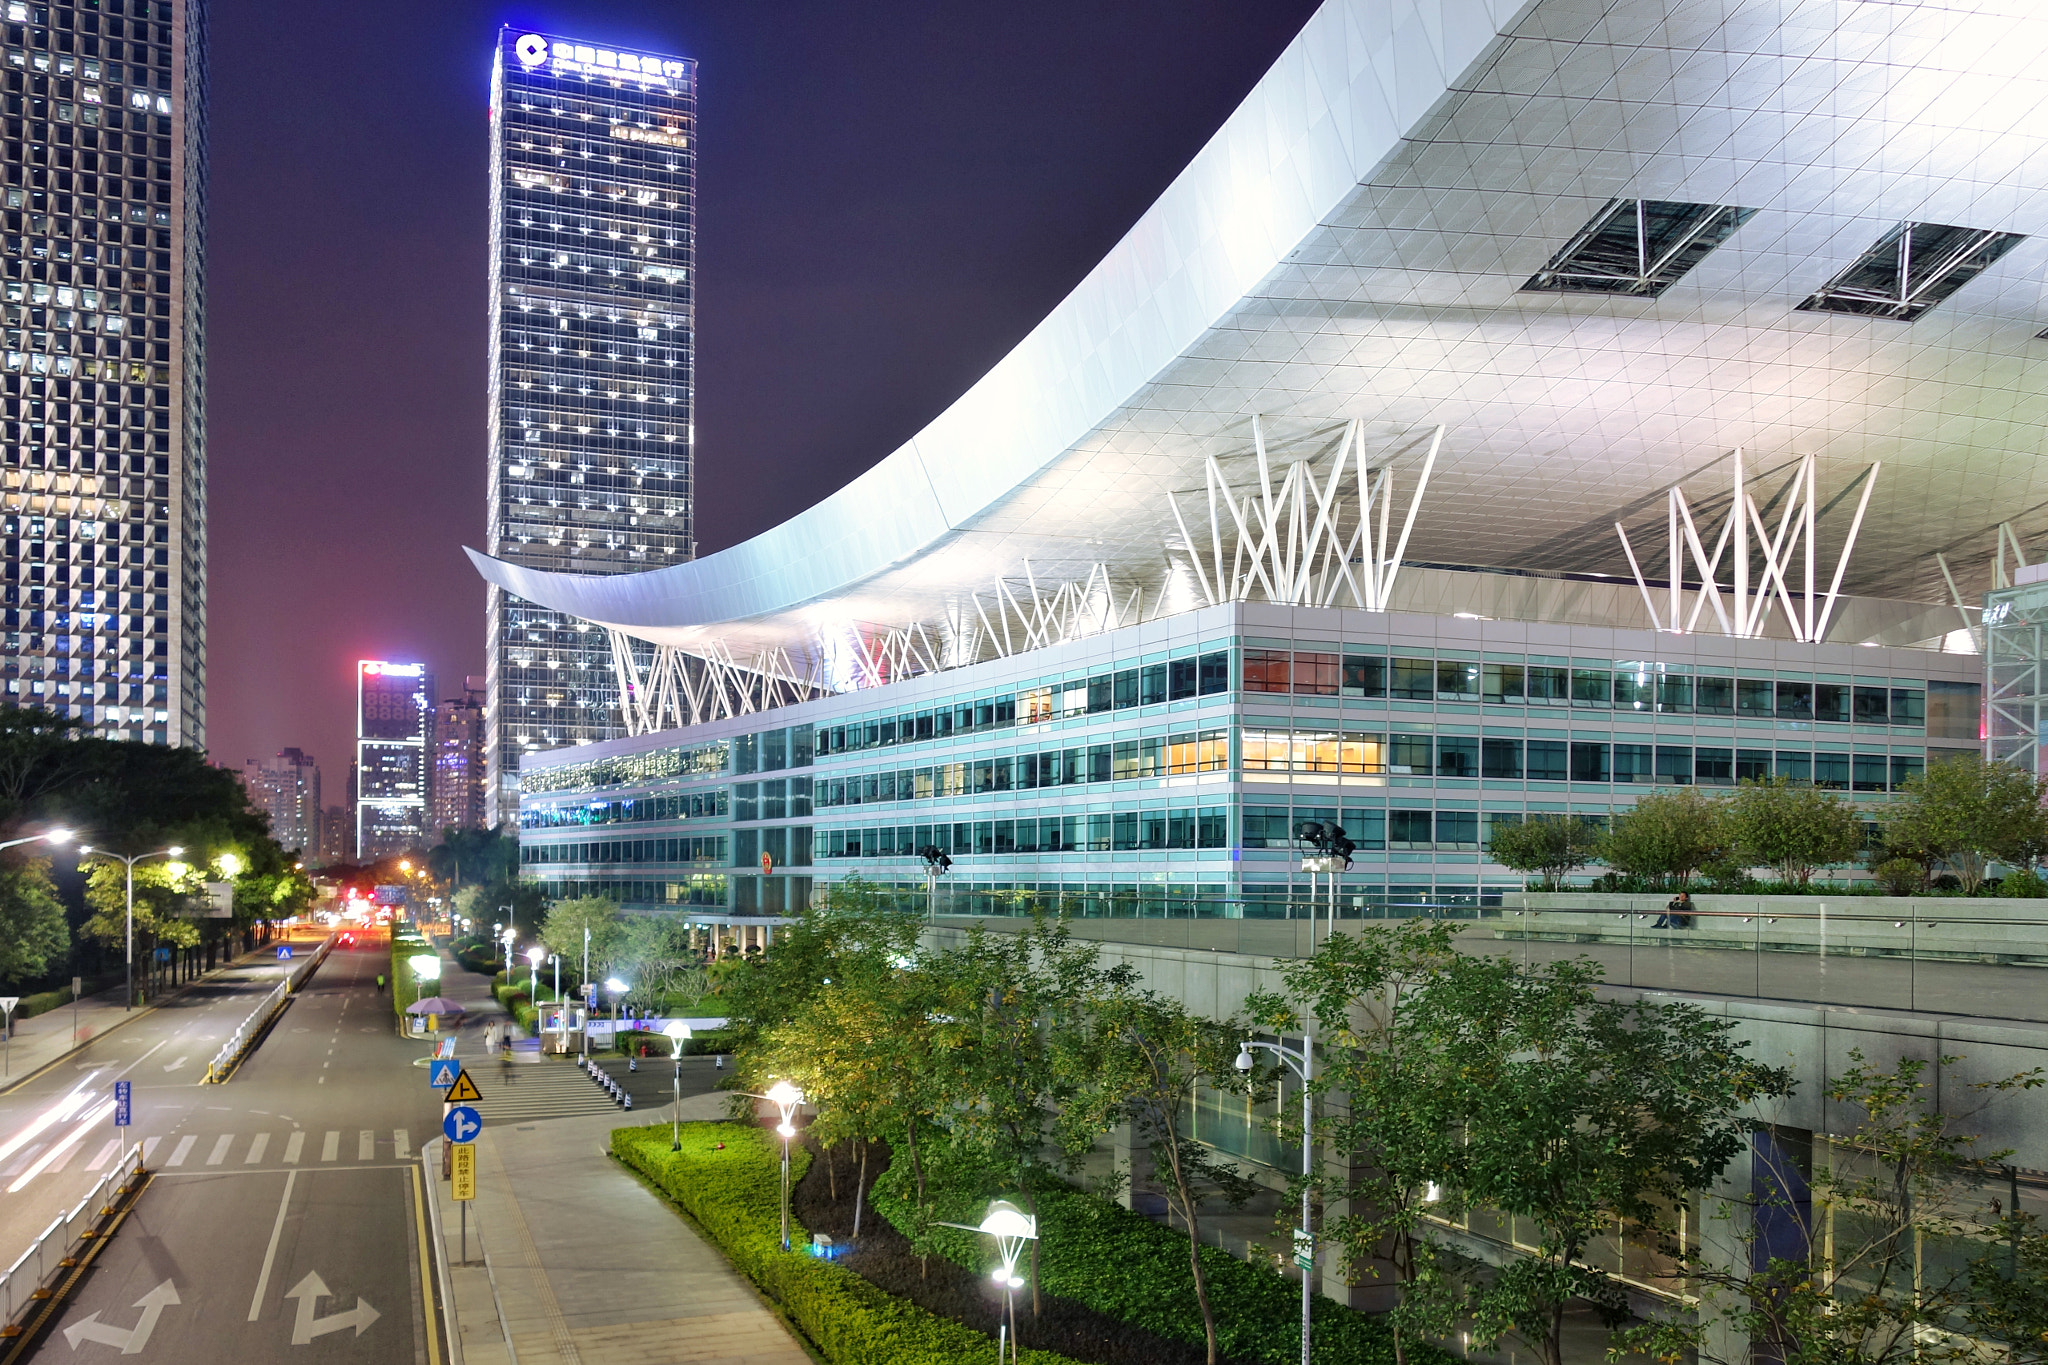 Sony Cyber-shot DSC-RX100 sample photo. A night view of the shenzhen civic centre photography